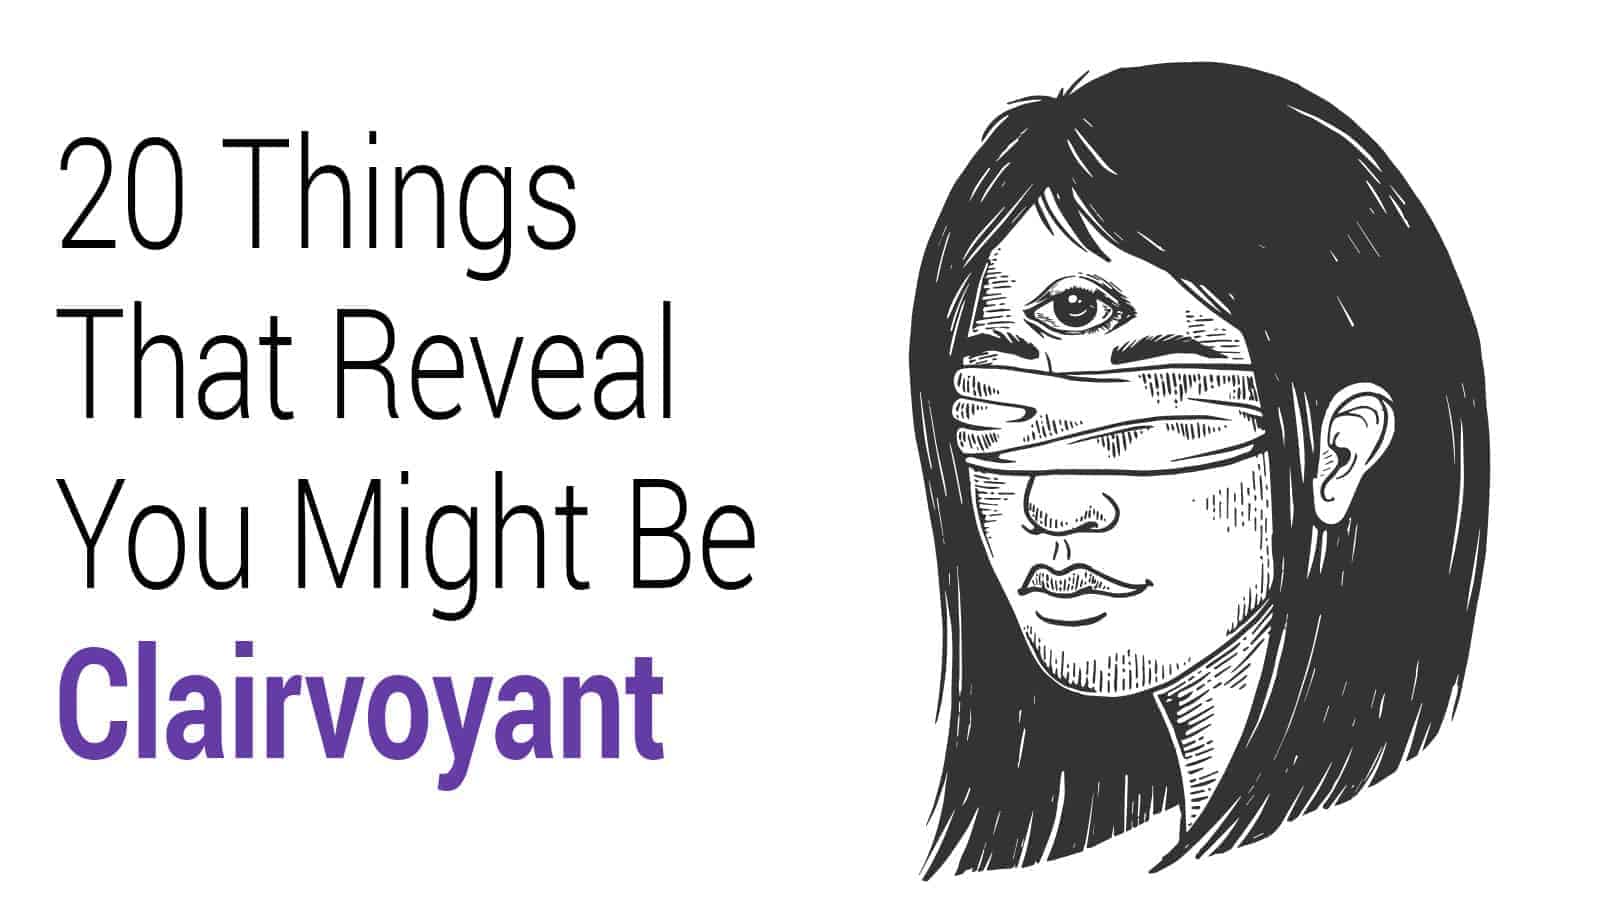 20 Things That Reveal You Might Be Clairvoyant